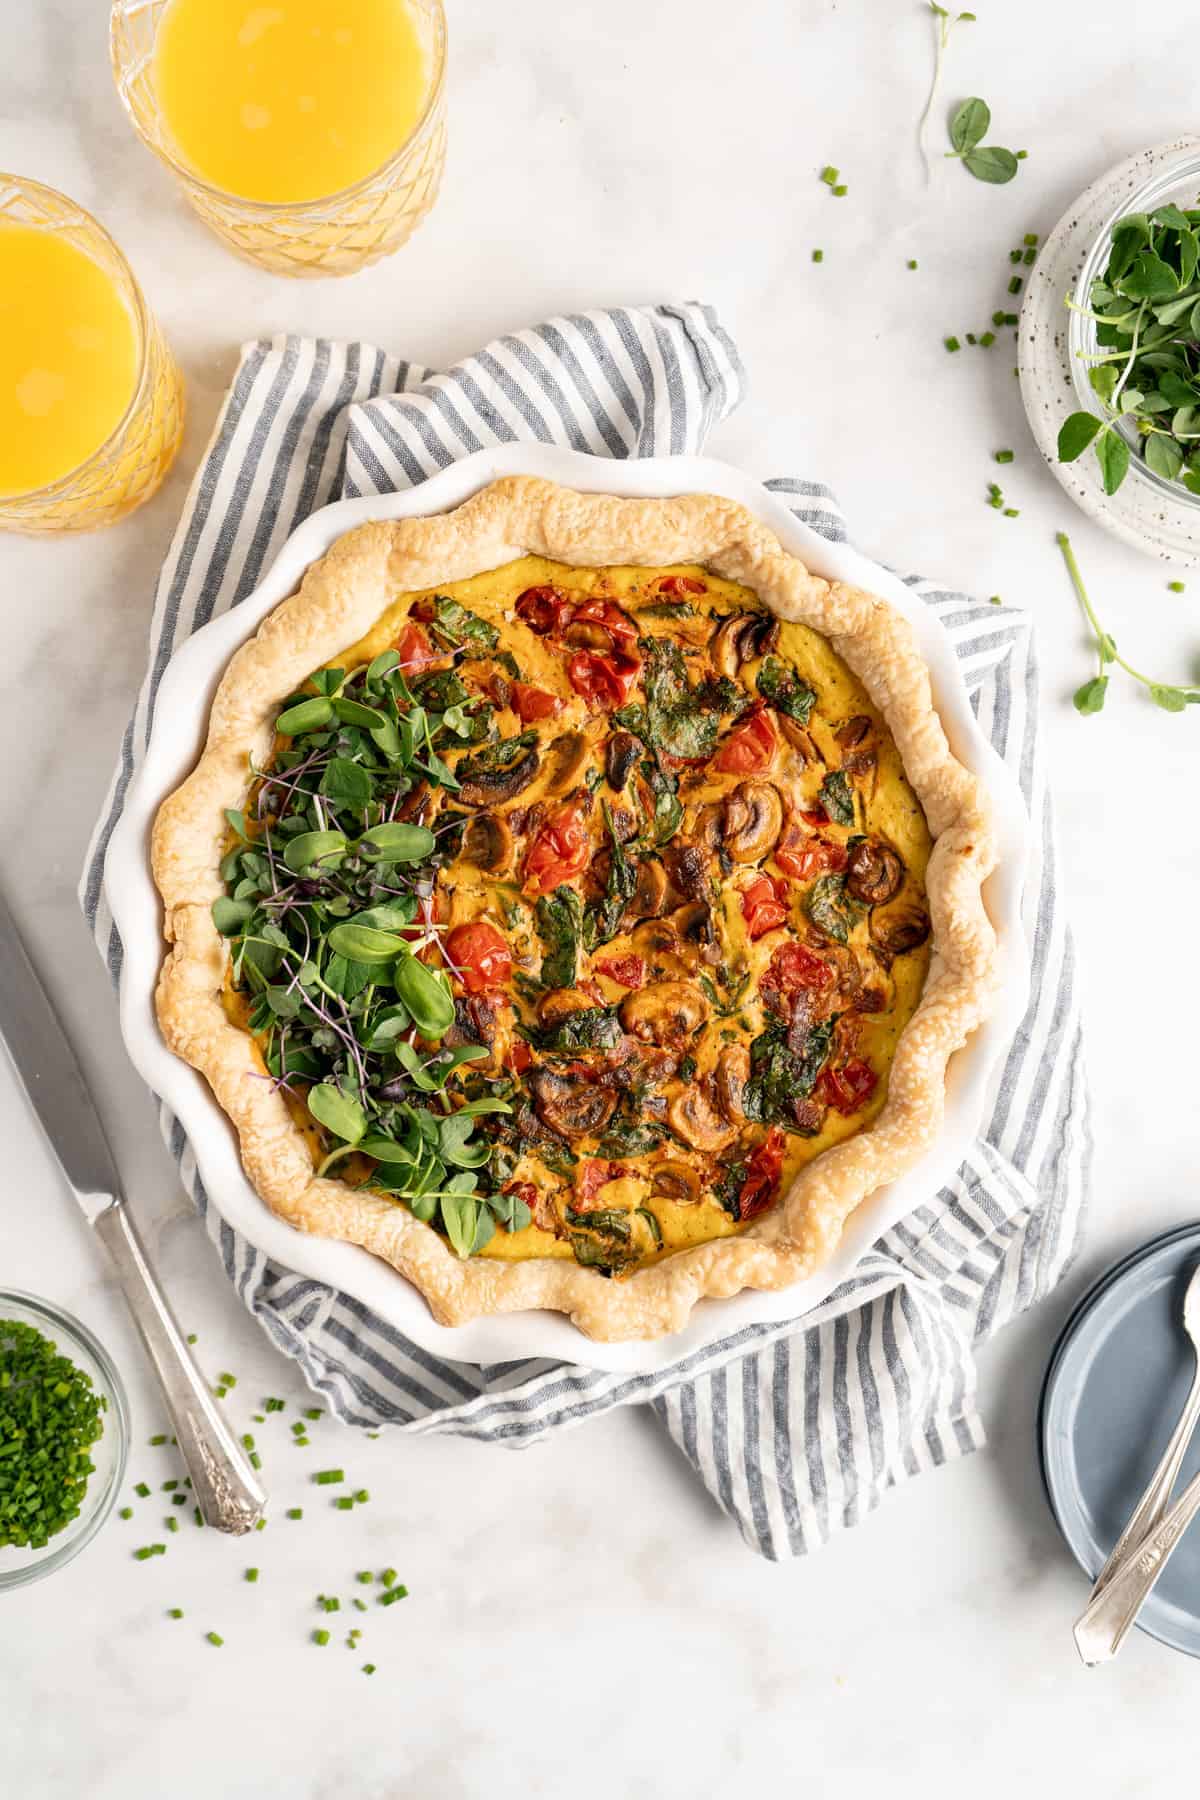 Overhead view of vegan vegetable quiche topped with greens